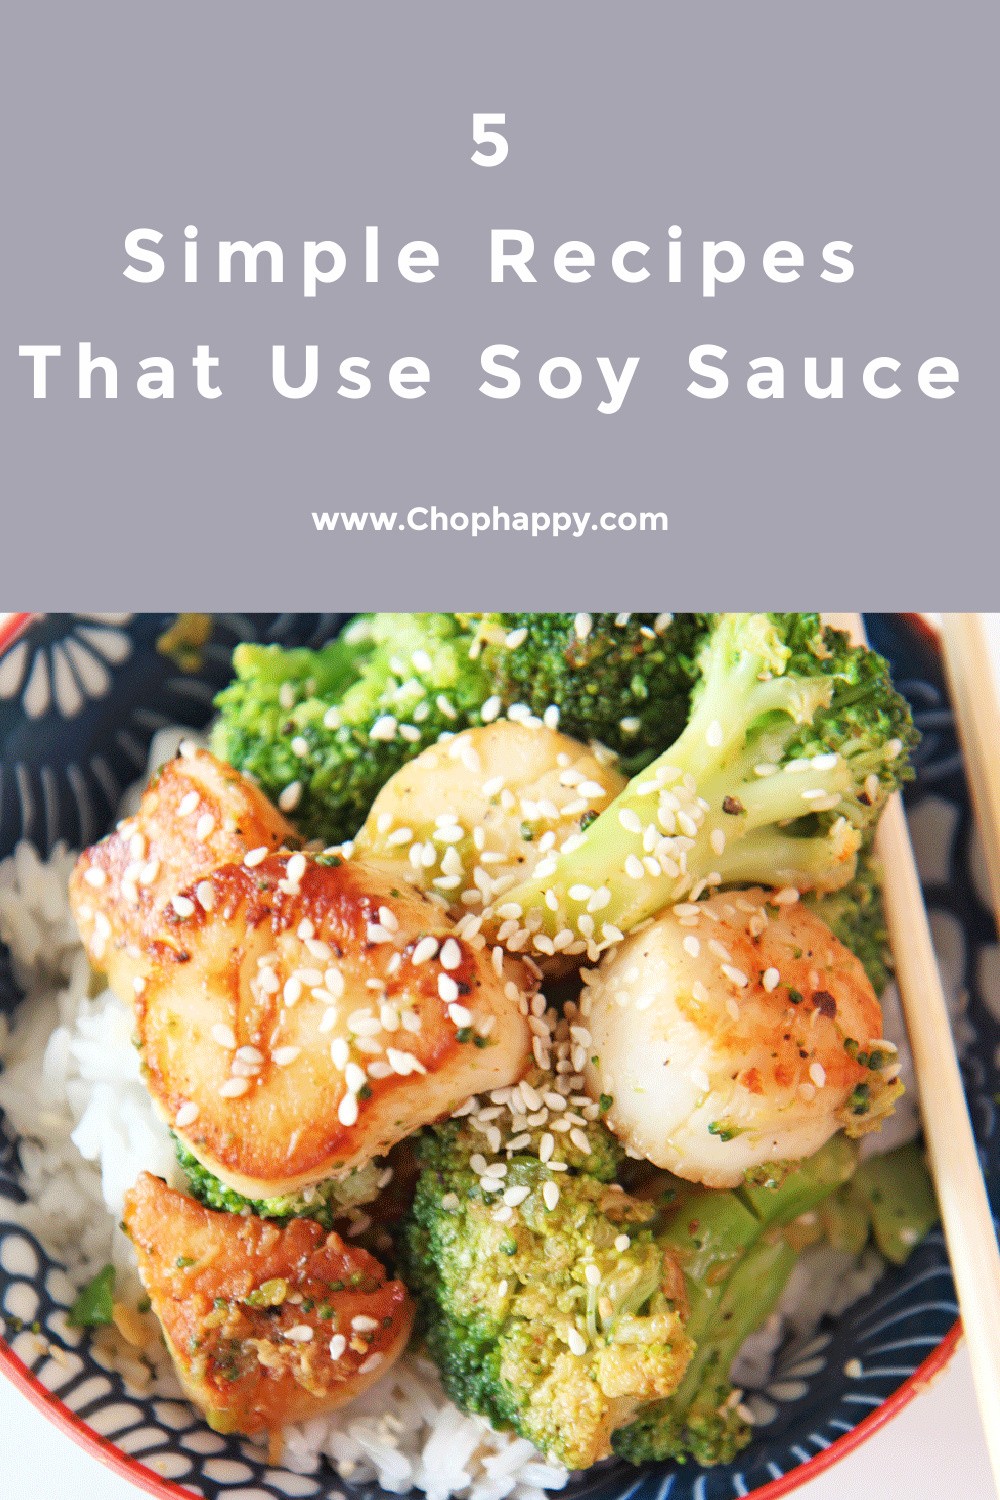 5 Simple Recipes That Use Soy Sauce. Easy fast dinners with the star pantry ingredient soy sauce. Happy Cooking! www.ChopHappy.com #soysauce #easyrecipes